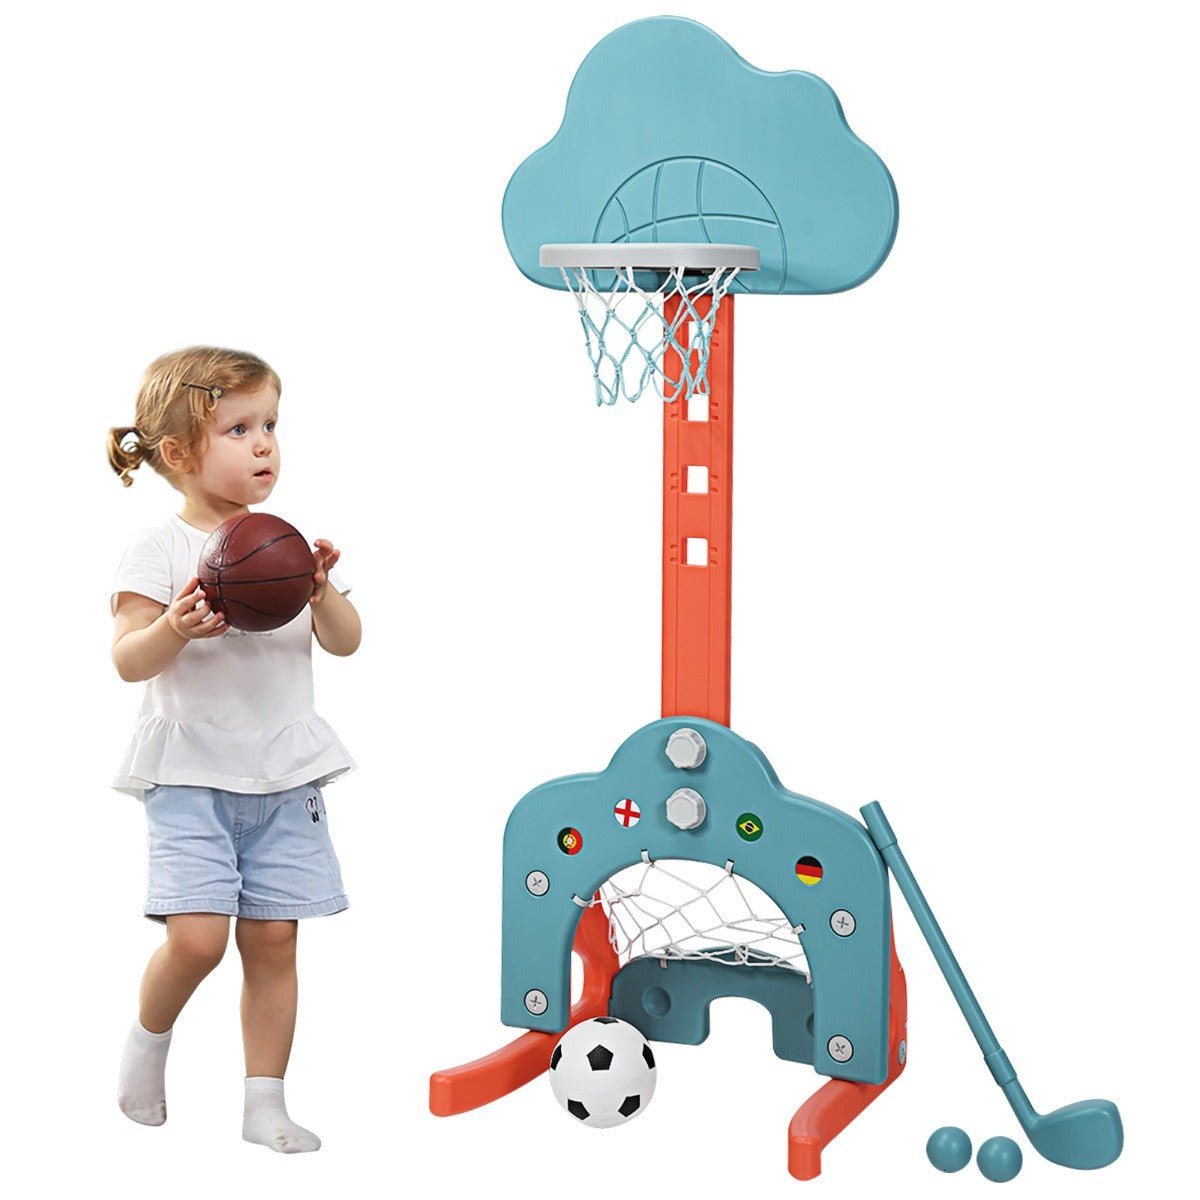 Green 3-in-1 Basketball Hoop Stand: Active Play with Height Adjusts